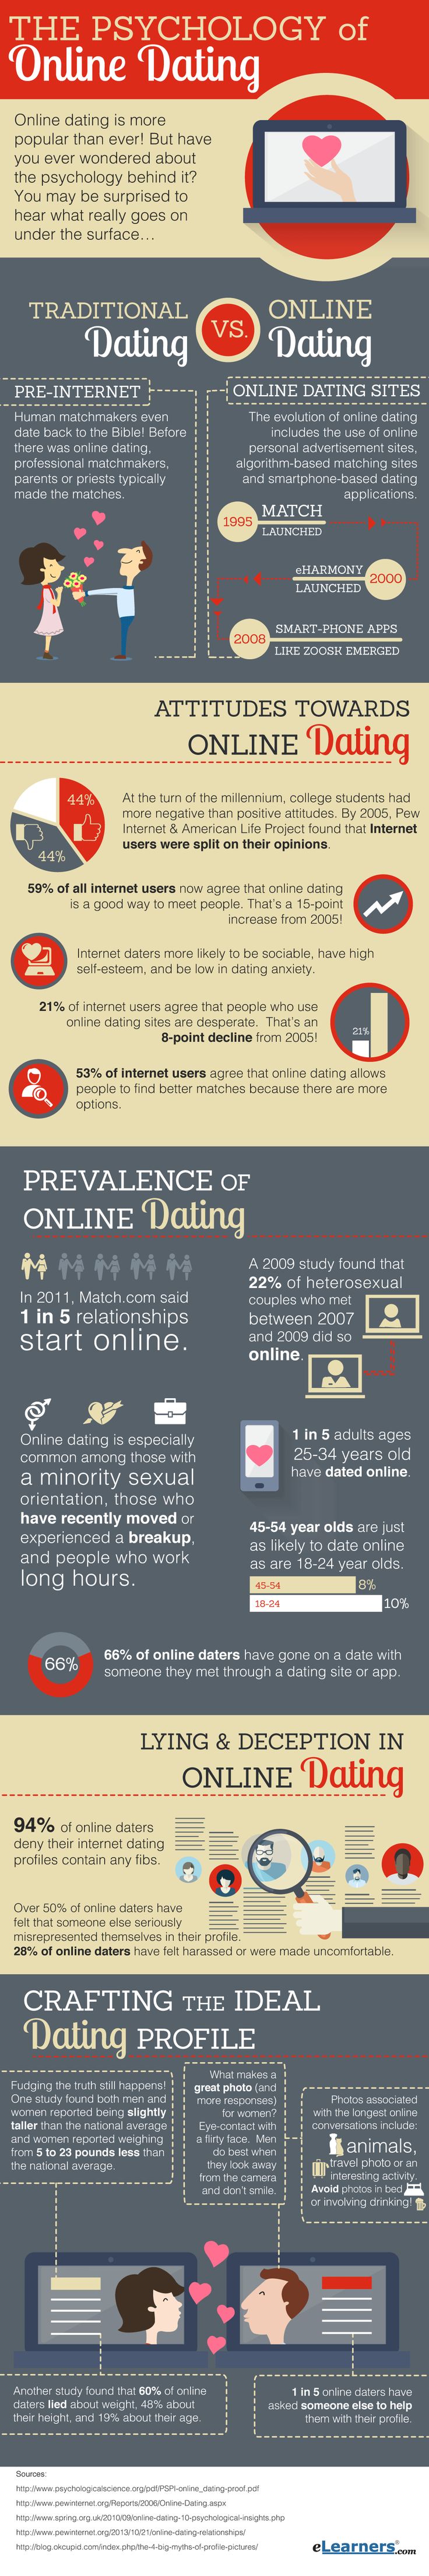 Statistics That'll Give You an Insider View on Online Dating - Love ...